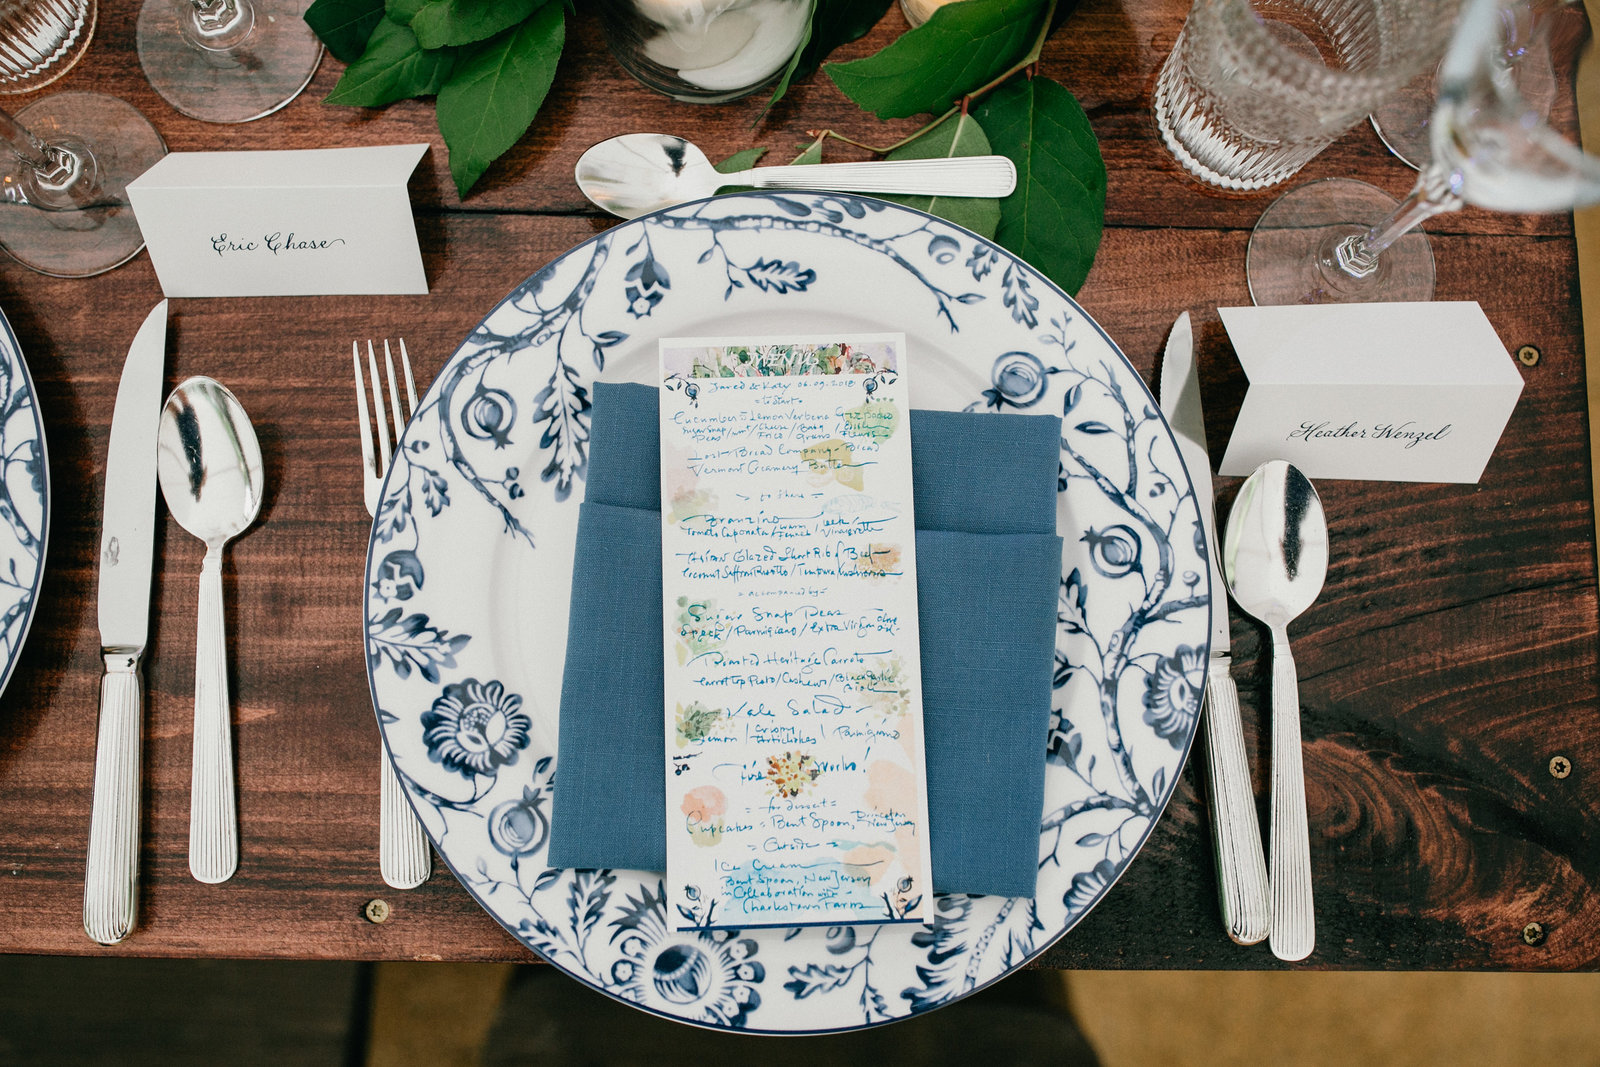 Beautifully illustrated menu's featuring Neumans Kitchen dishes for the wedding.